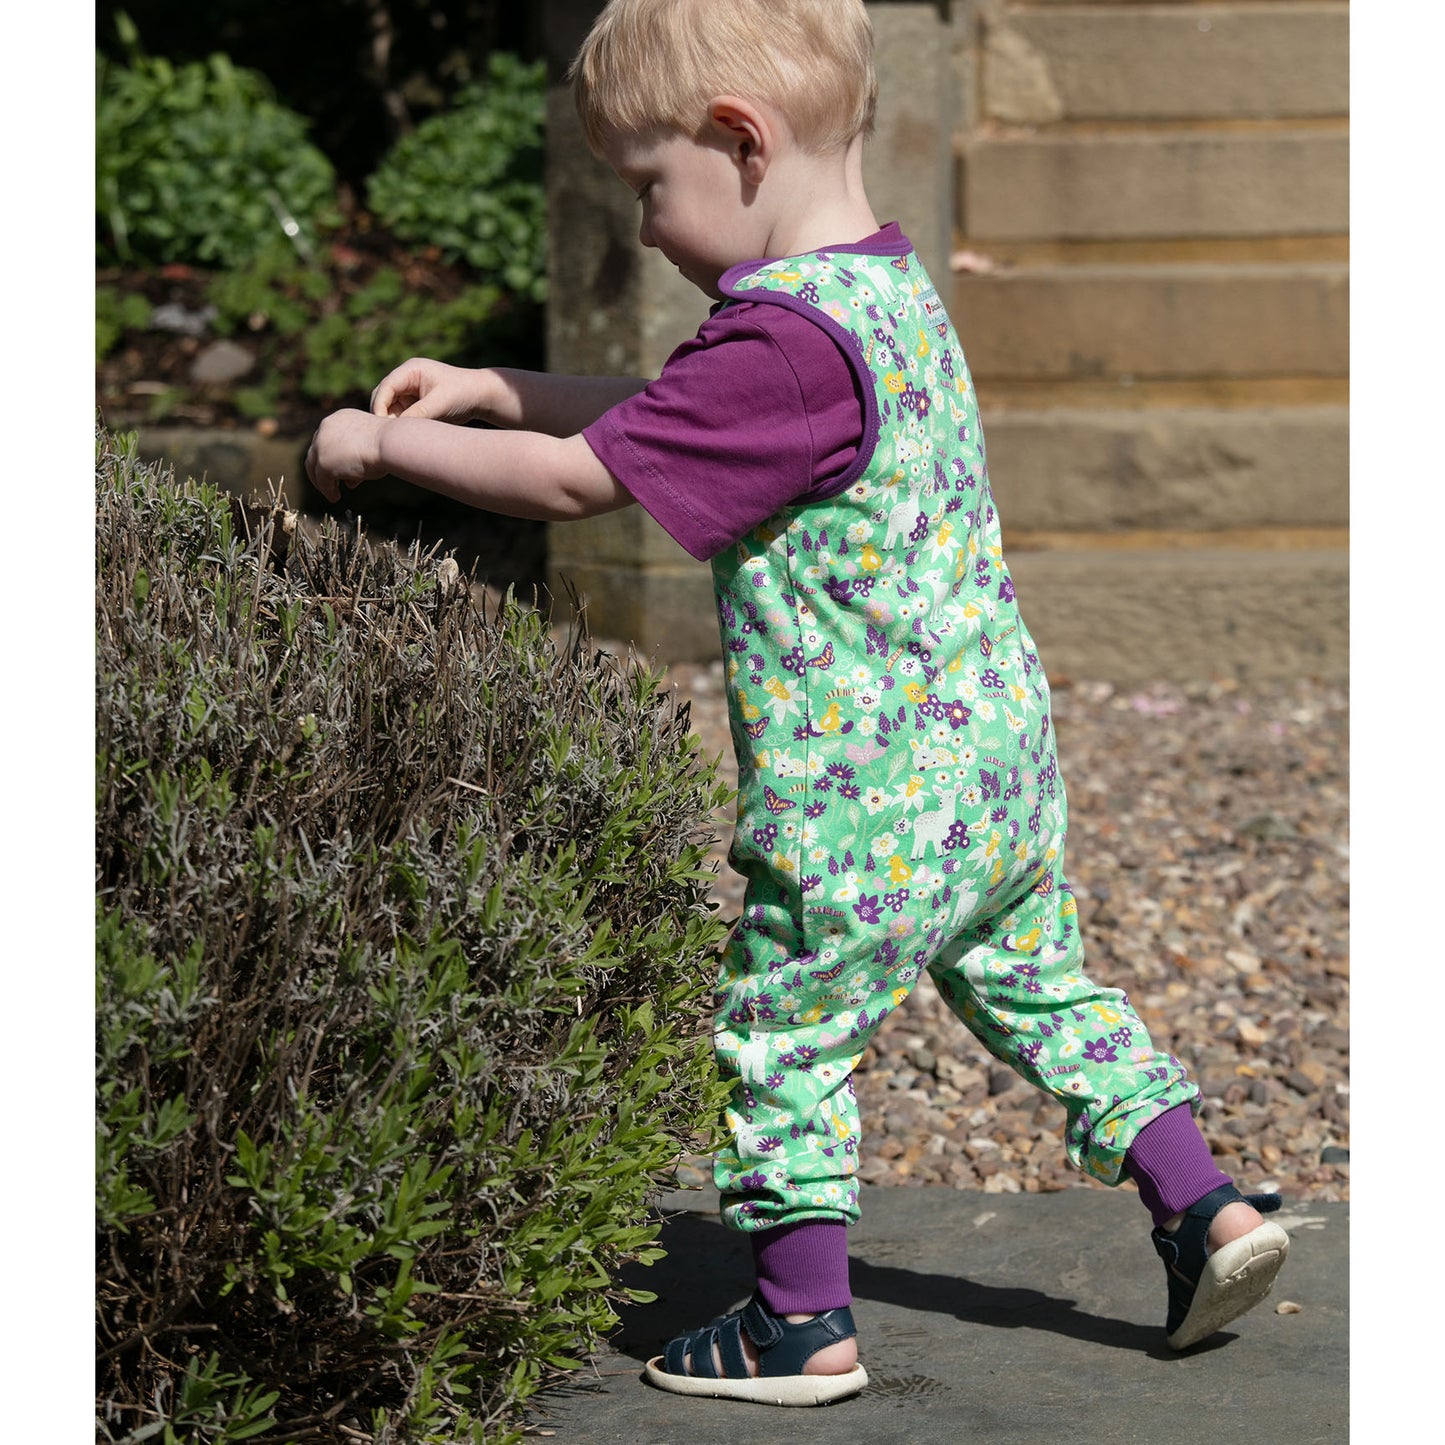 Baby Dungarees - 'Spring Meadow' - Organic Cotton